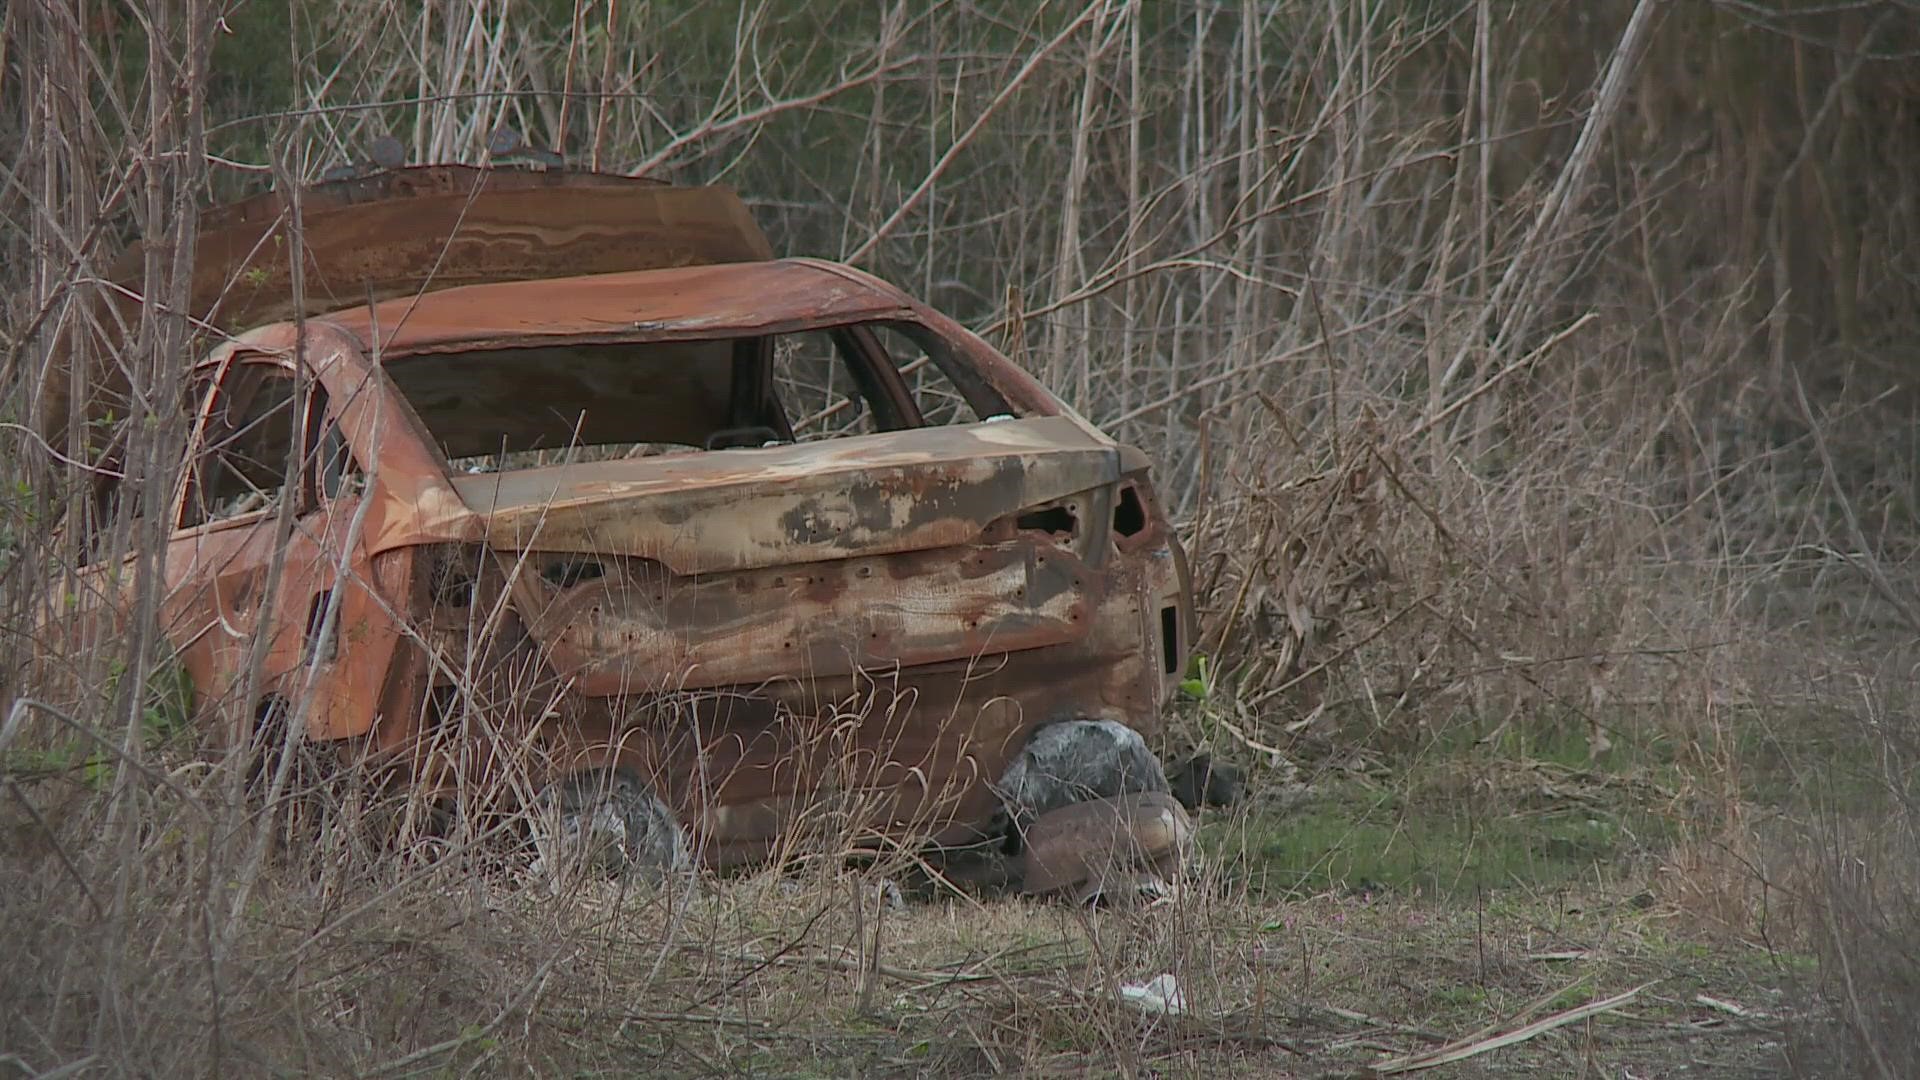 The city council recently passed an ordinance that said your car can be taken if you do illegal dumping. You would then have to pay the fees to get it back.